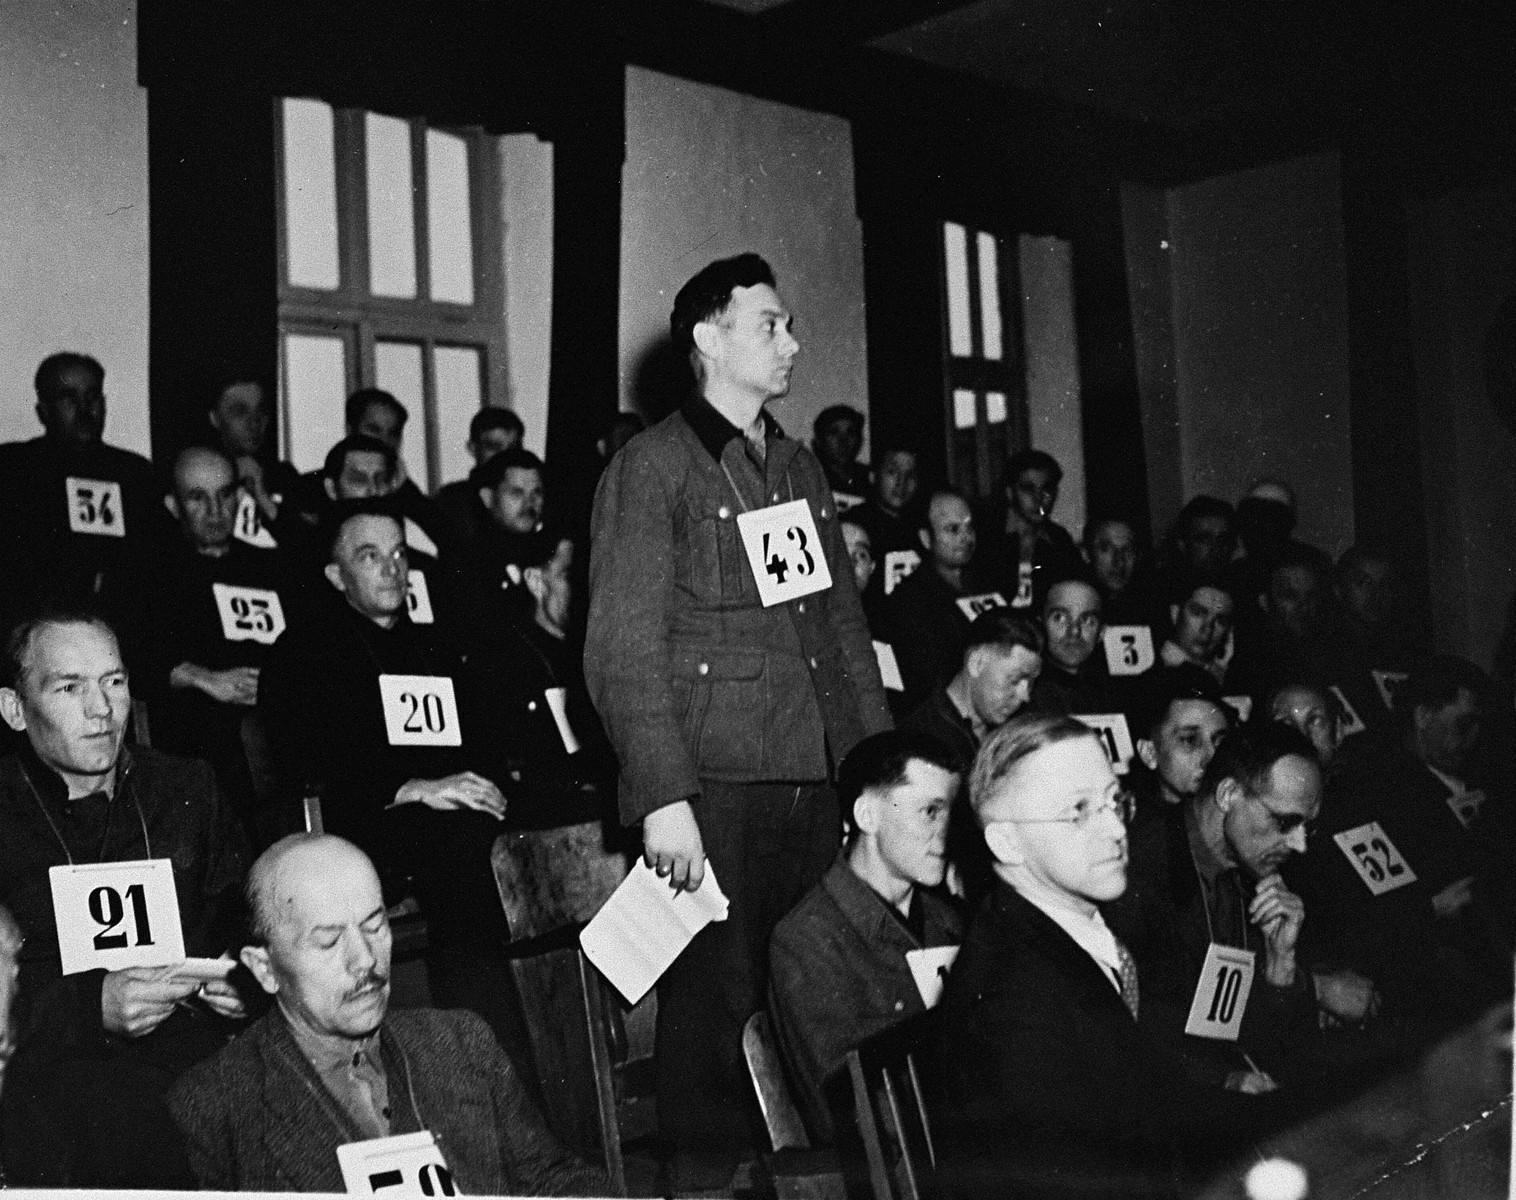 Former SS-Unterscharfuehrer Wilhelm Mueller, a defendant at the trial of 61 former camp personnel and prisoners from Mauthausen, stands in his place in the defendants' dock.  

Muellert was convicted and sentenced to death on May 13, 1946.